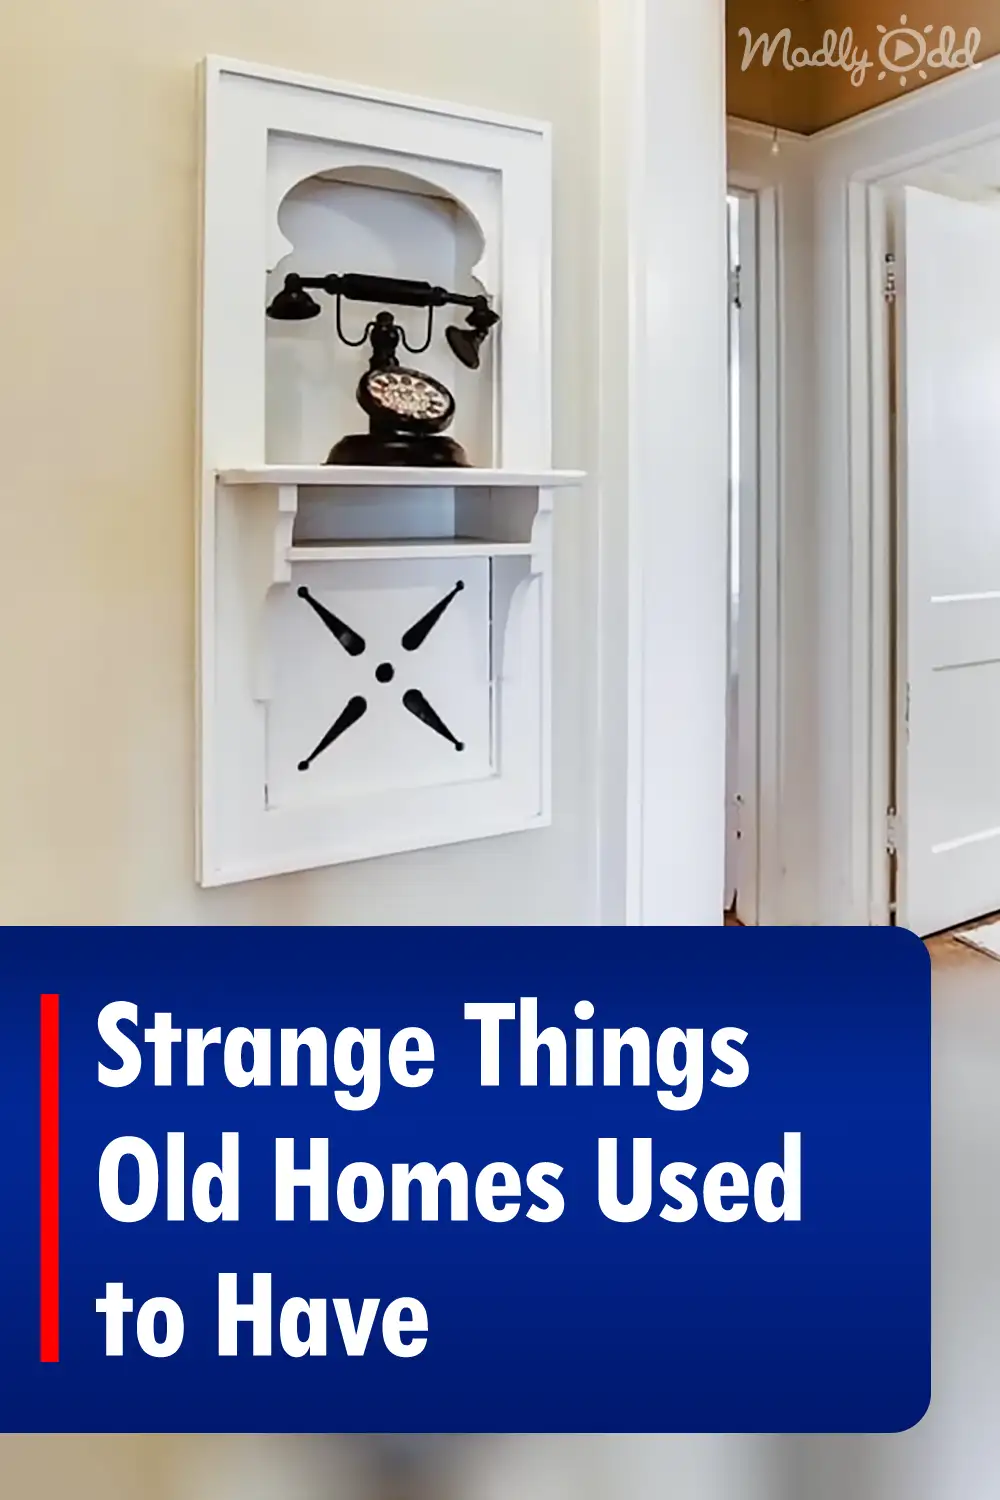 Strange Things Old Homes Used to Have